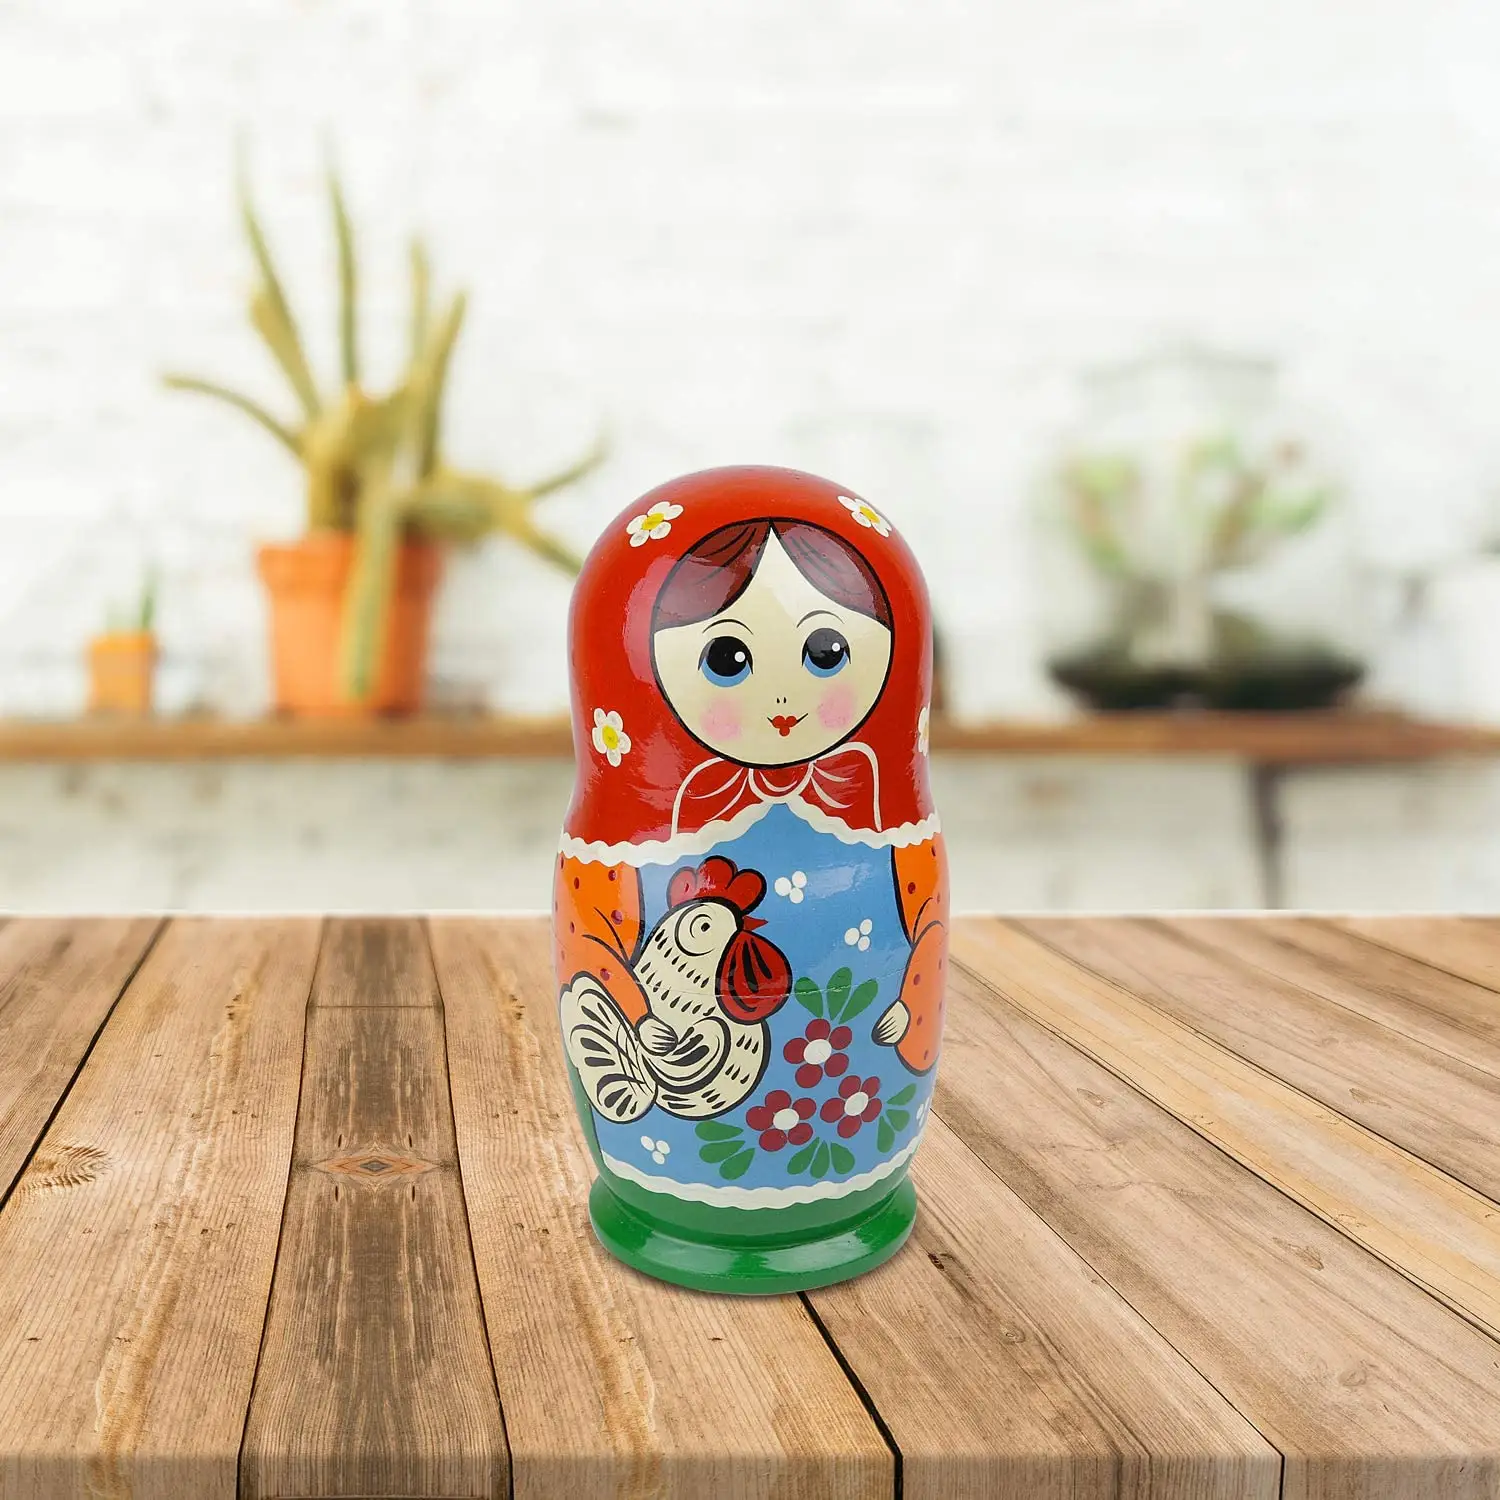 Popular And Cute Early Learning Career Pretend Rose Wood Matryoshka Russian Stacking Dolls